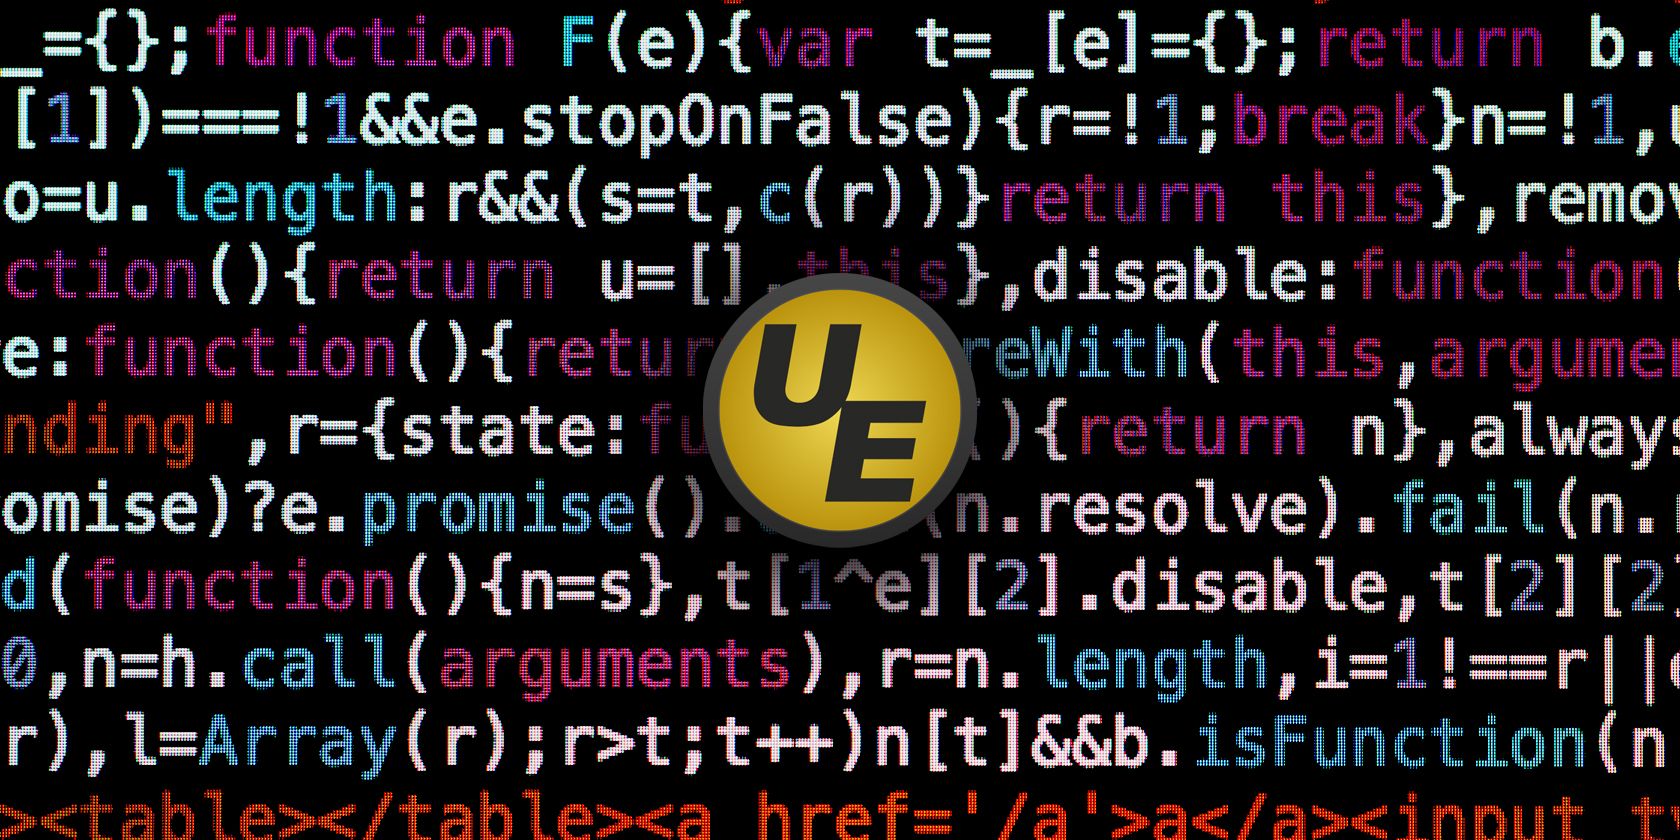 The UltraEdit logo over some code.